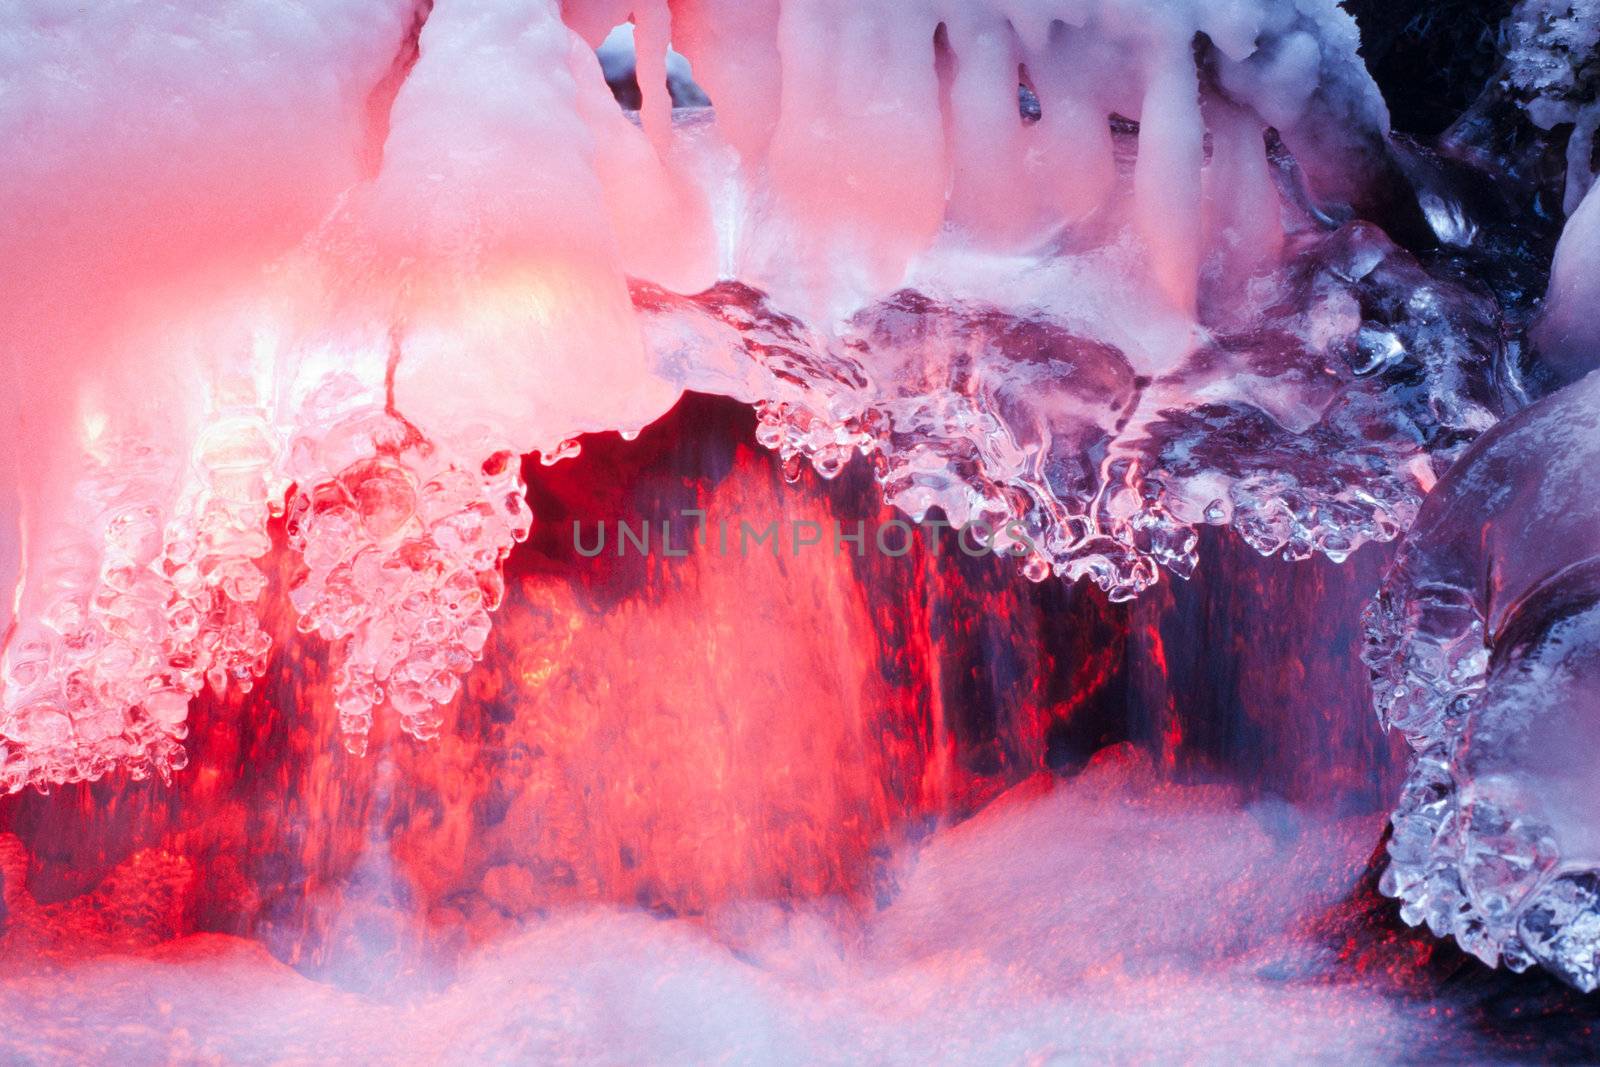 Dramatically illuminated waterfall at -30 degrees celsius with bizarre ice build-up.